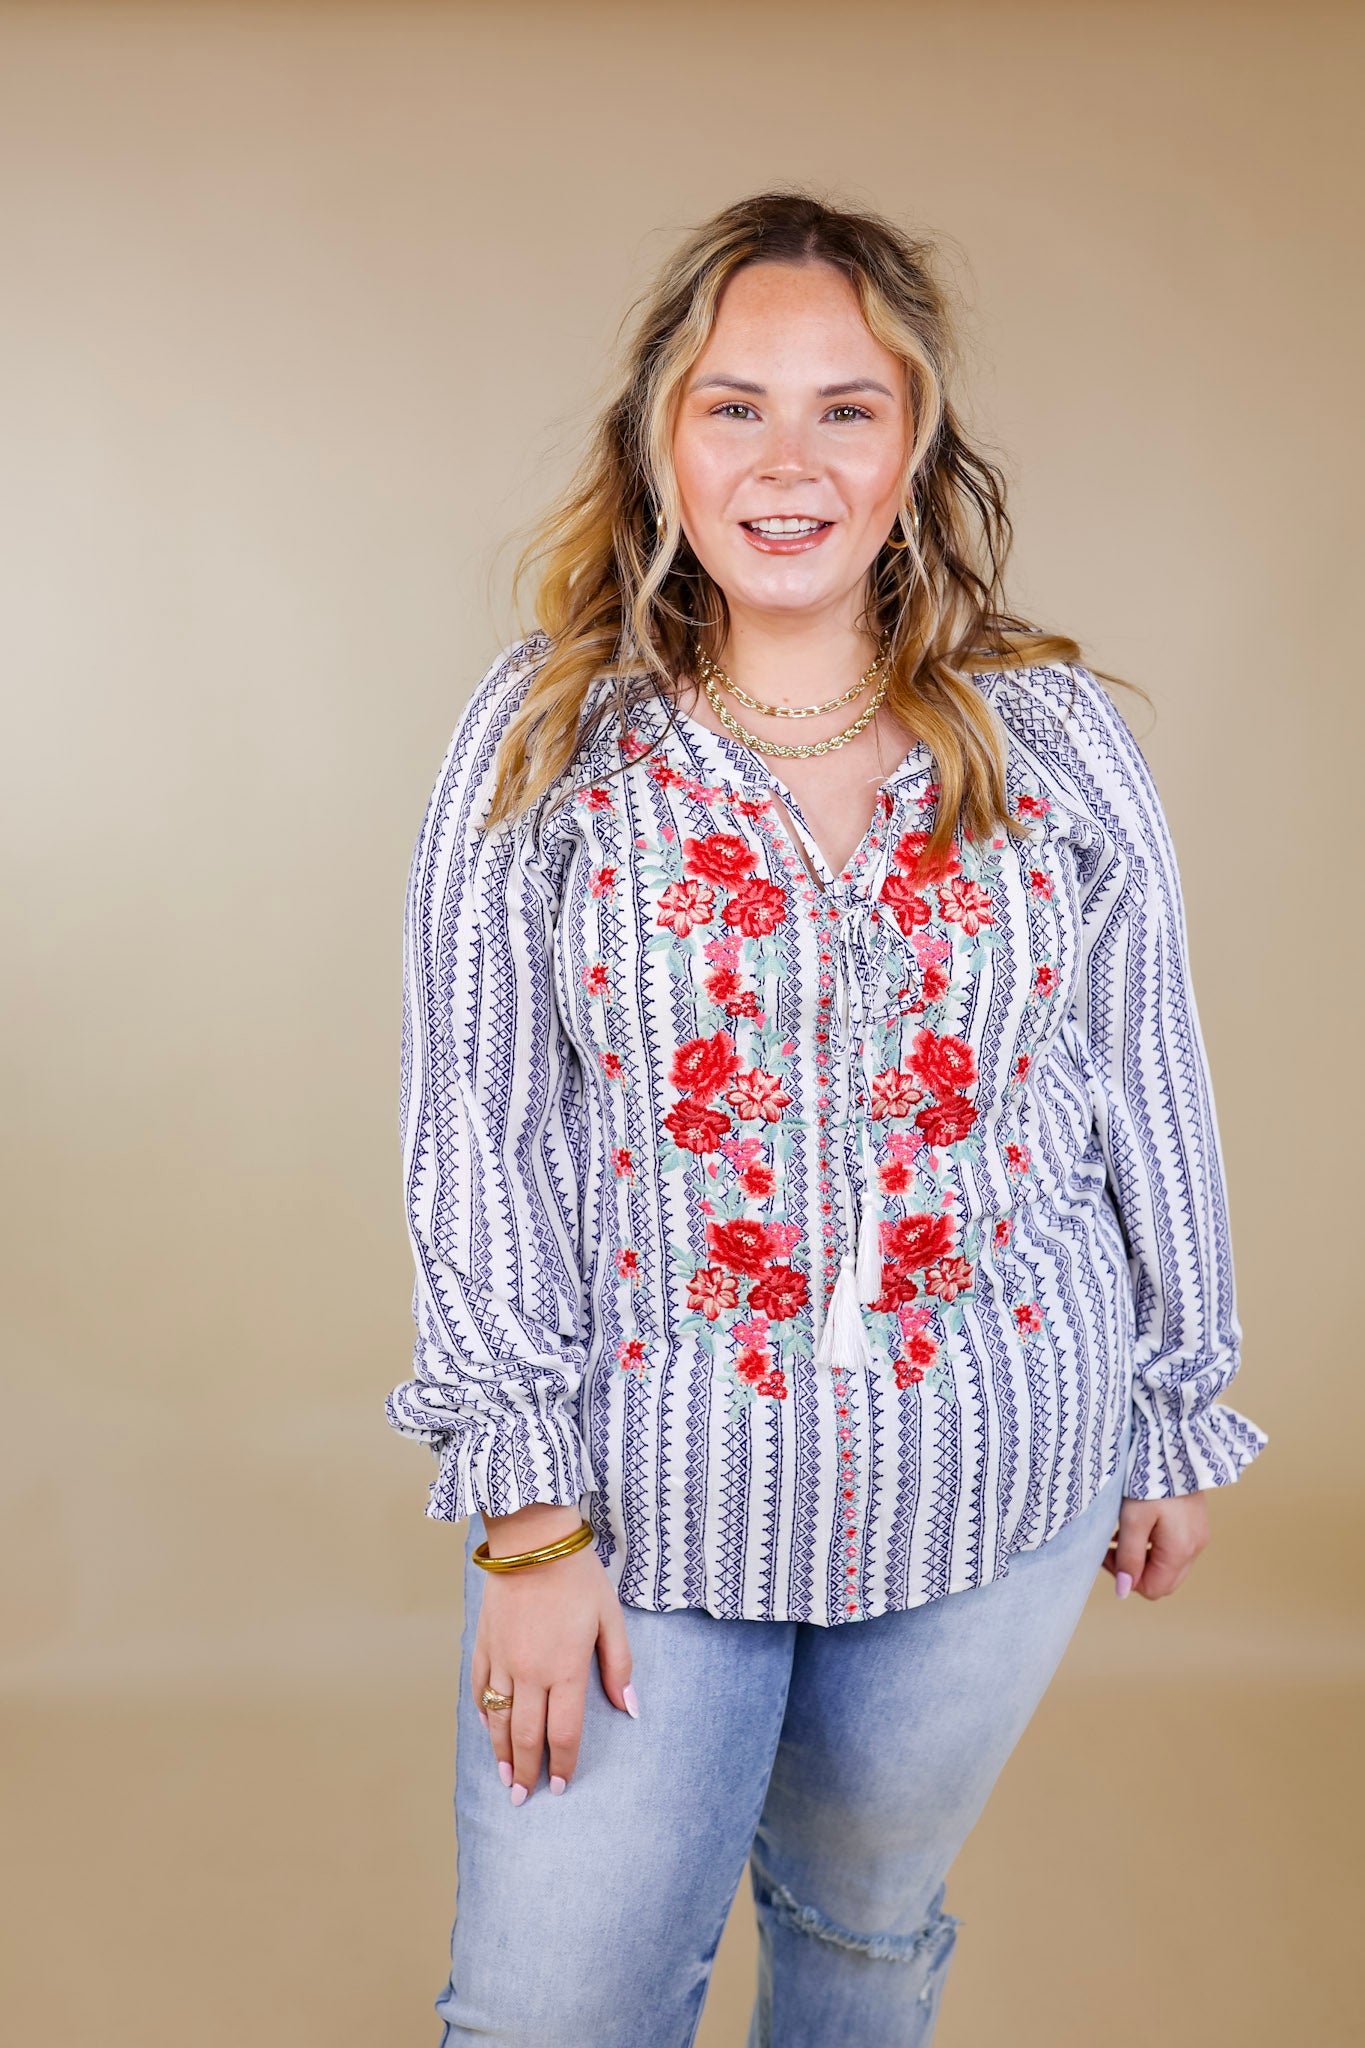 Blissful Beginnings Floral Embroidered Top with Keyhole and Tie Neck in Navy and White - Giddy Up Glamour Boutique